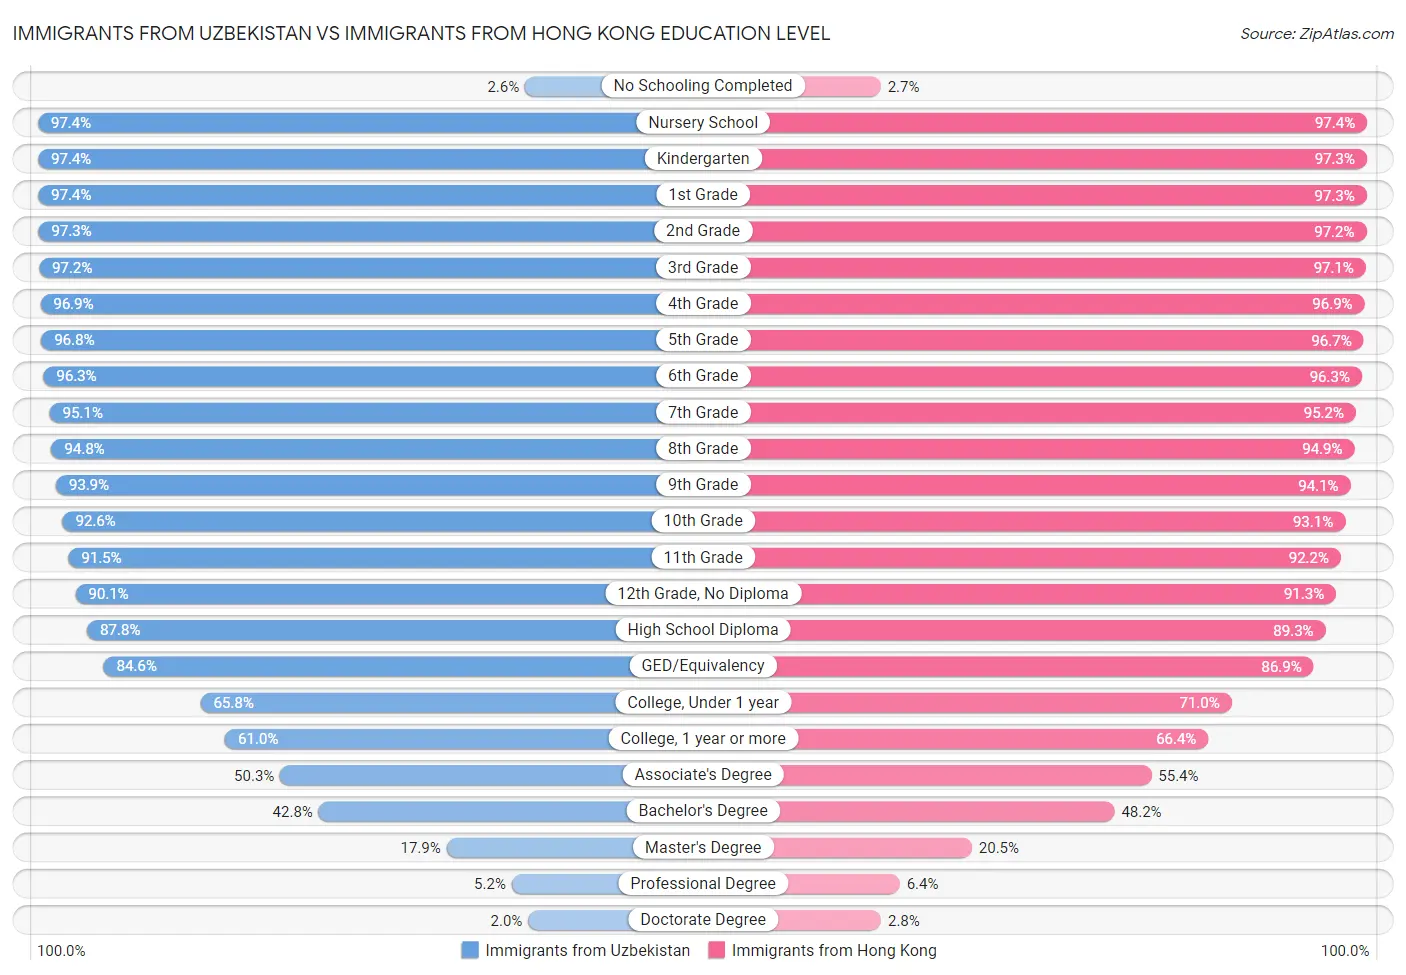 Immigrants from Uzbekistan vs Immigrants from Hong Kong Education Level